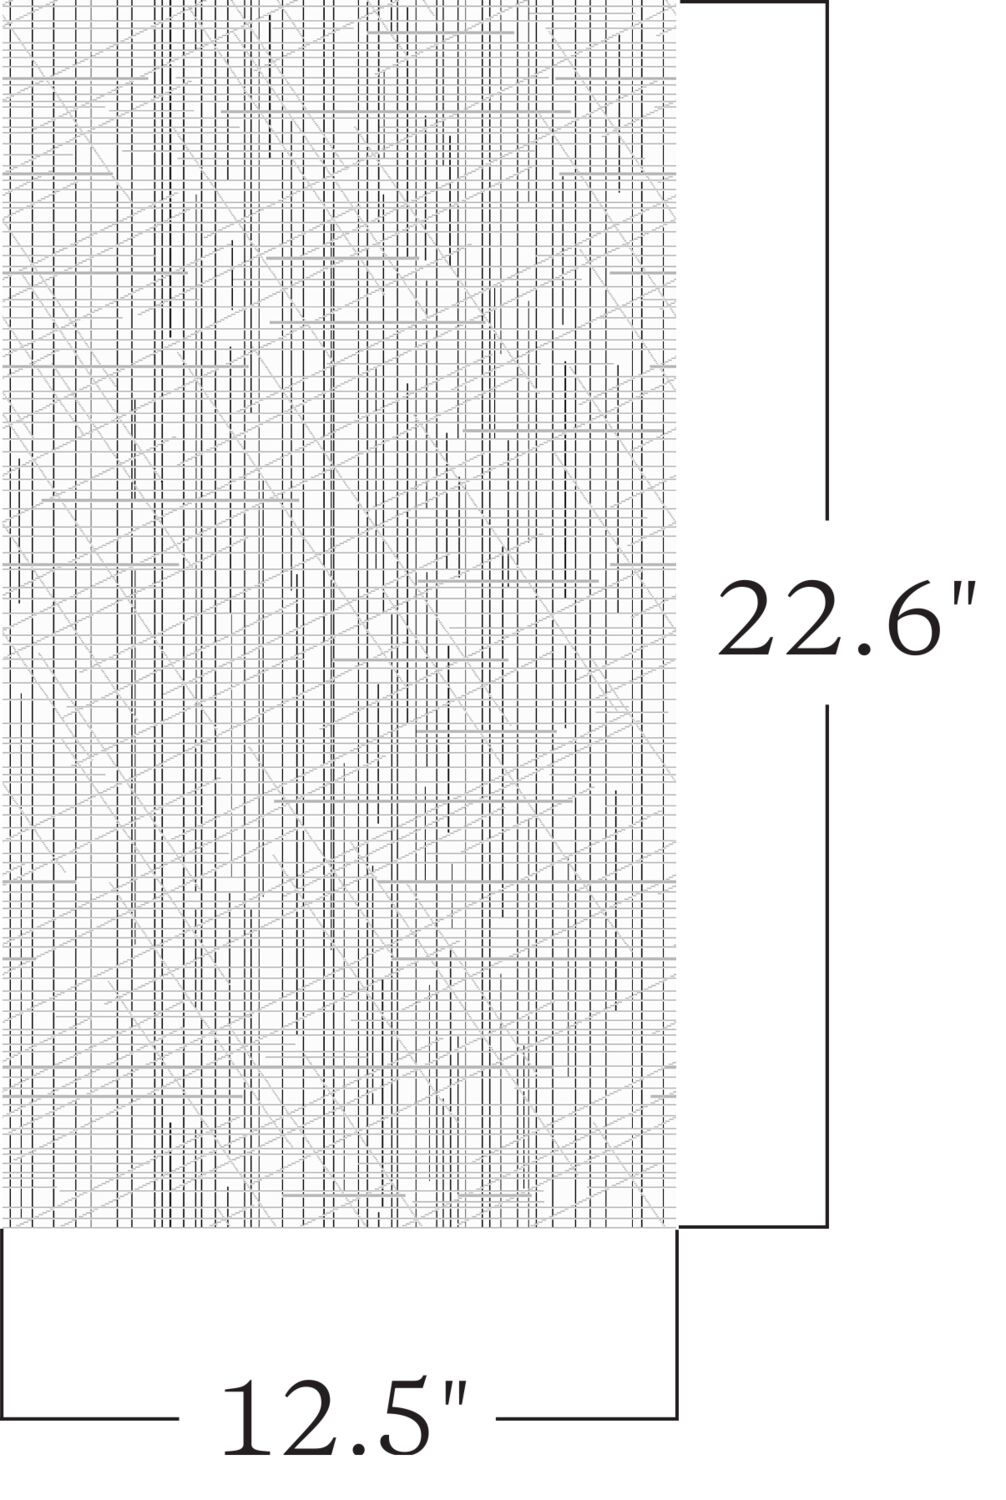 Intraweb - Dual Trace - 2002 - 02 Pattern Repeat Image